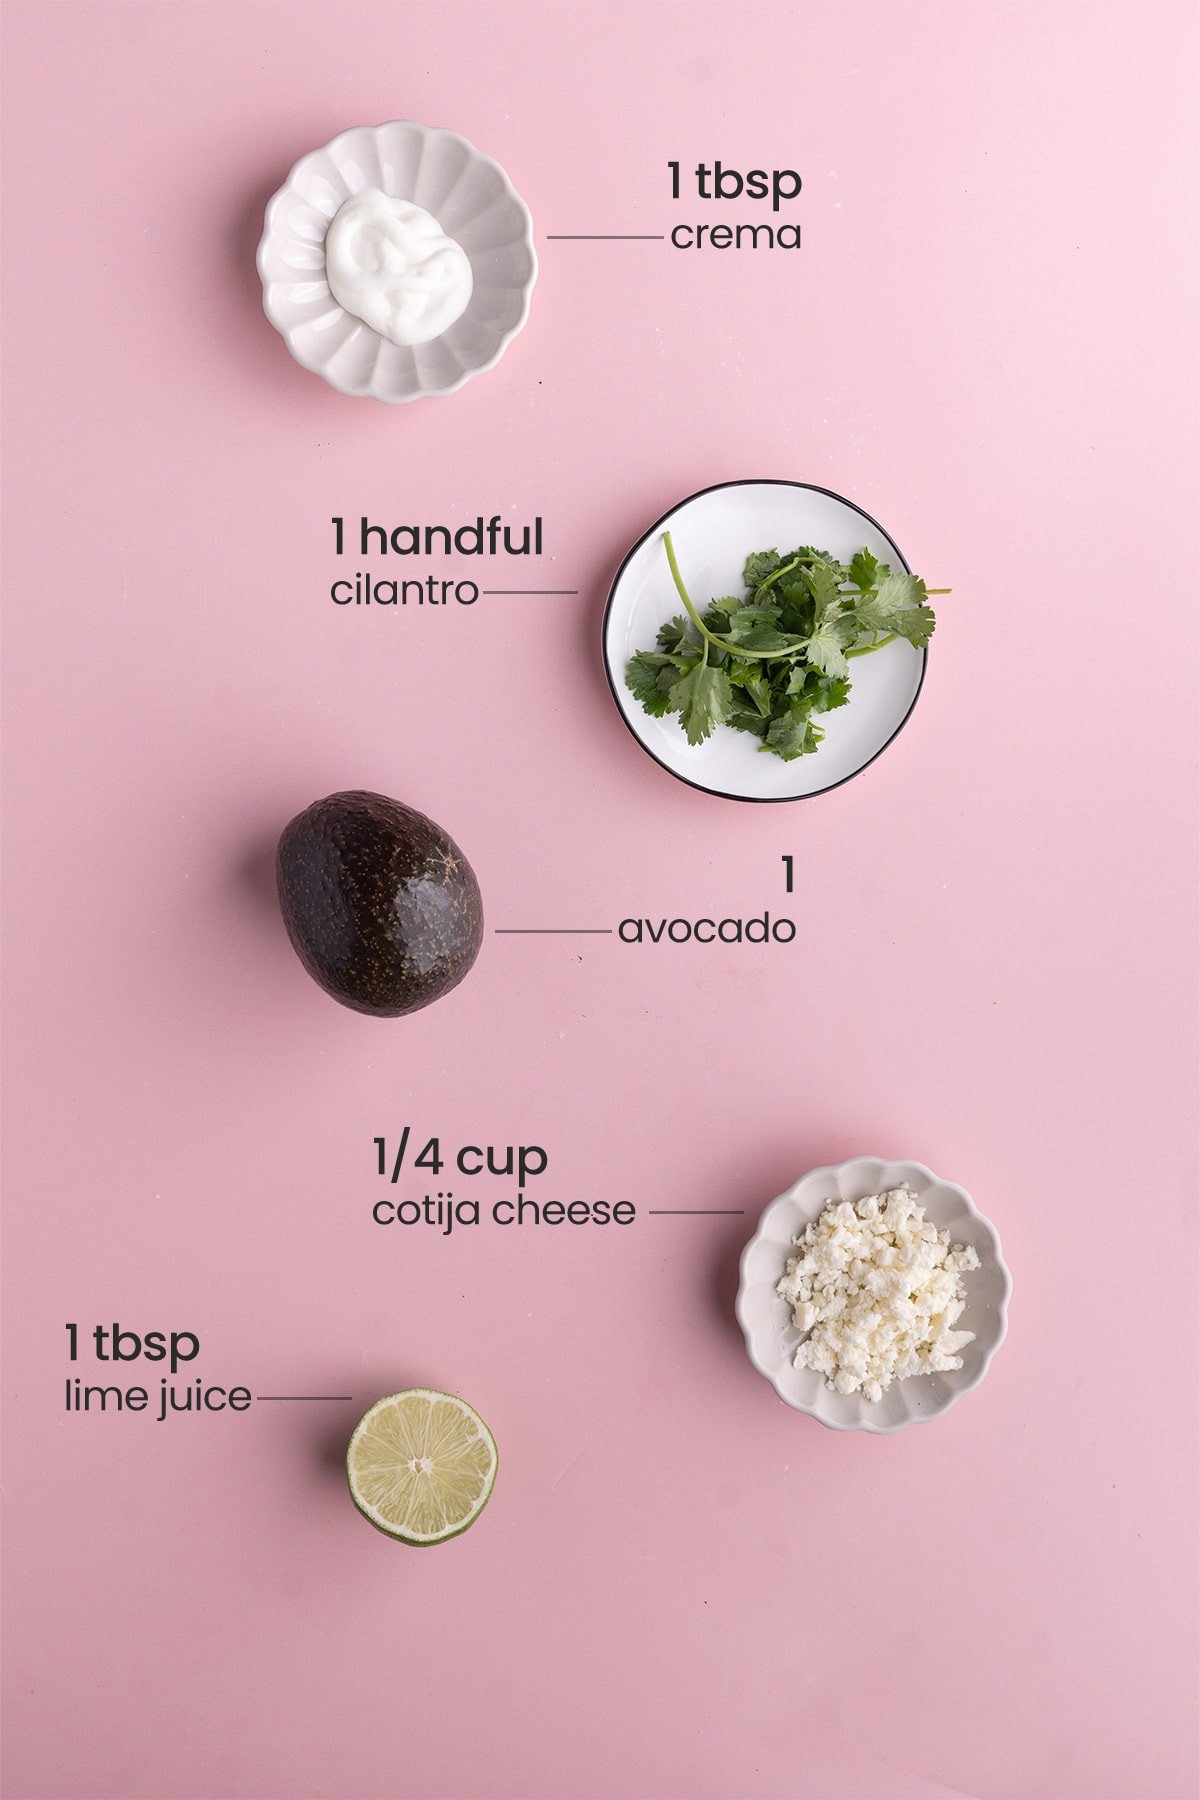 Optional add-ins for fish tacos including cream, cilantro, avocado, cotija cheese, and lime 